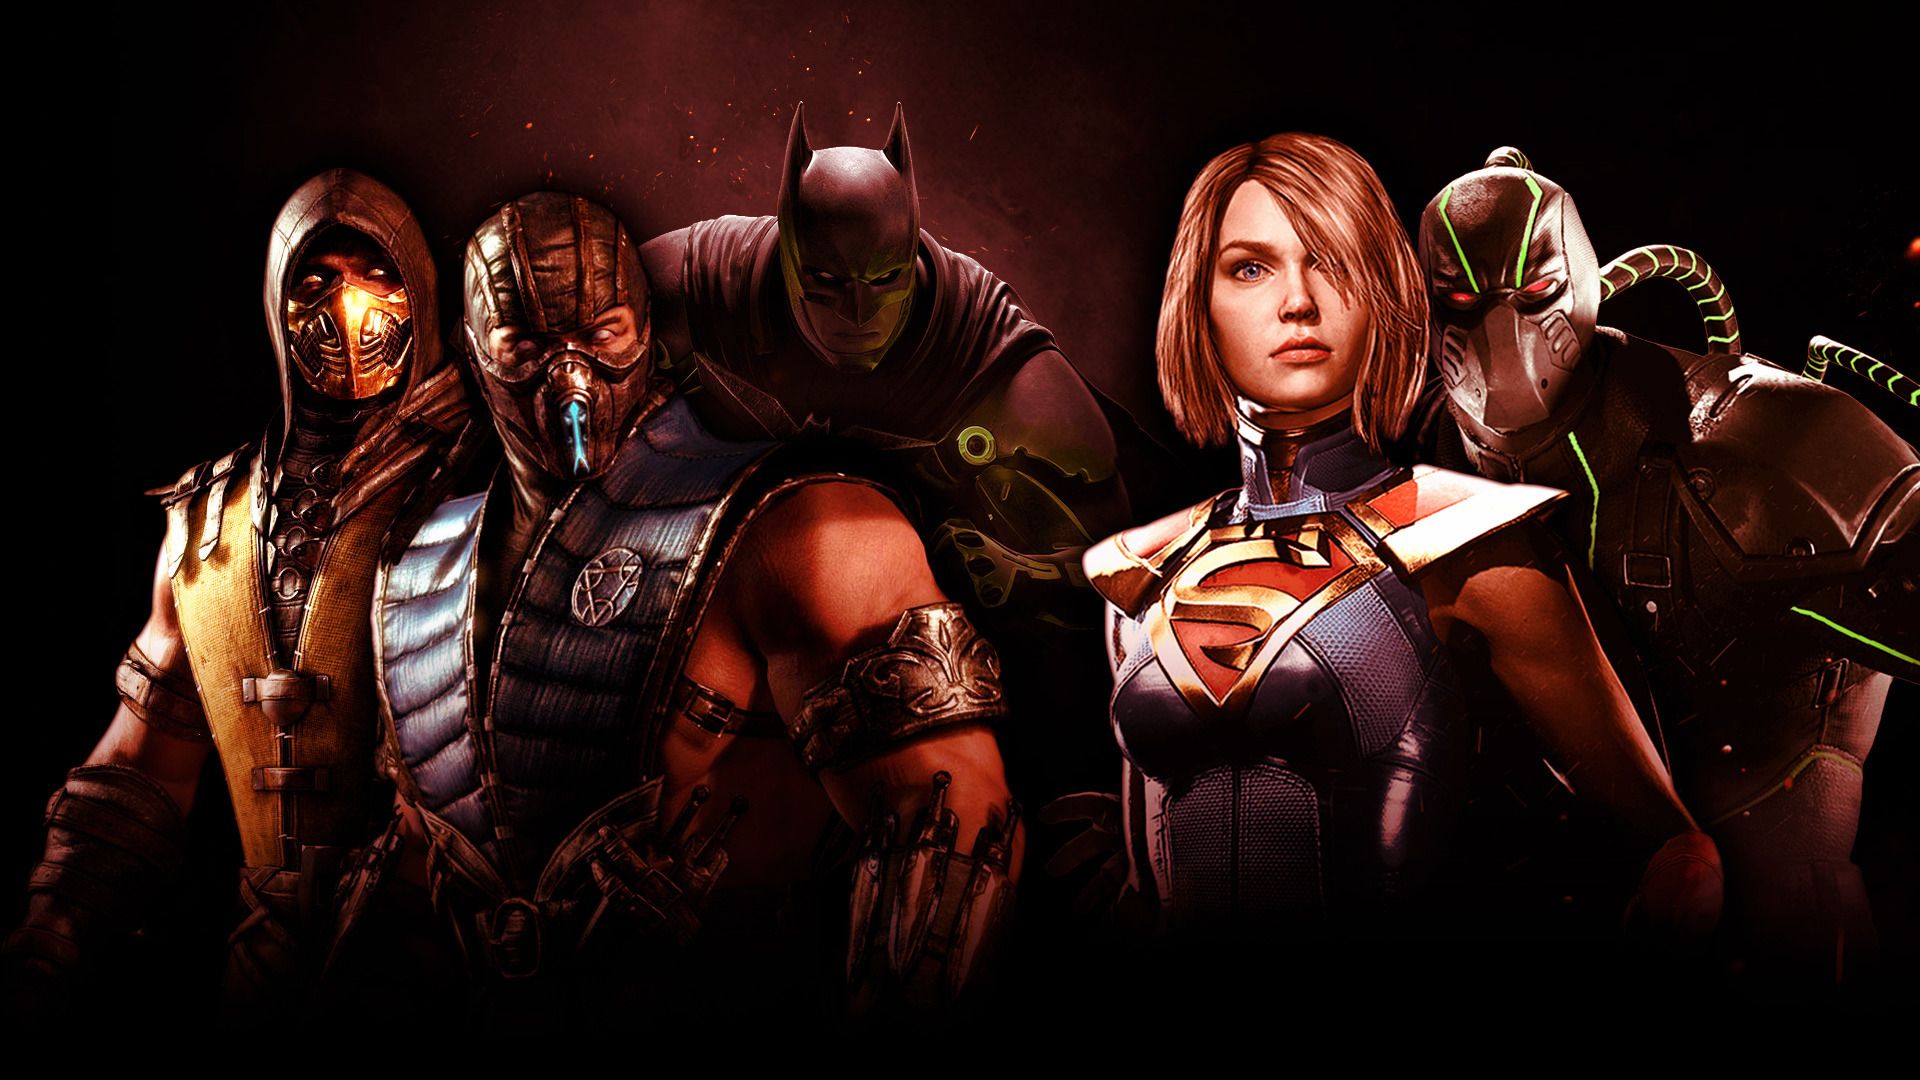 XSX PS5 Mortal Kombat And Injustice Installments In The Works As NetherRealm Is Hiring To Drive The Next Gen Console Graphics Vision